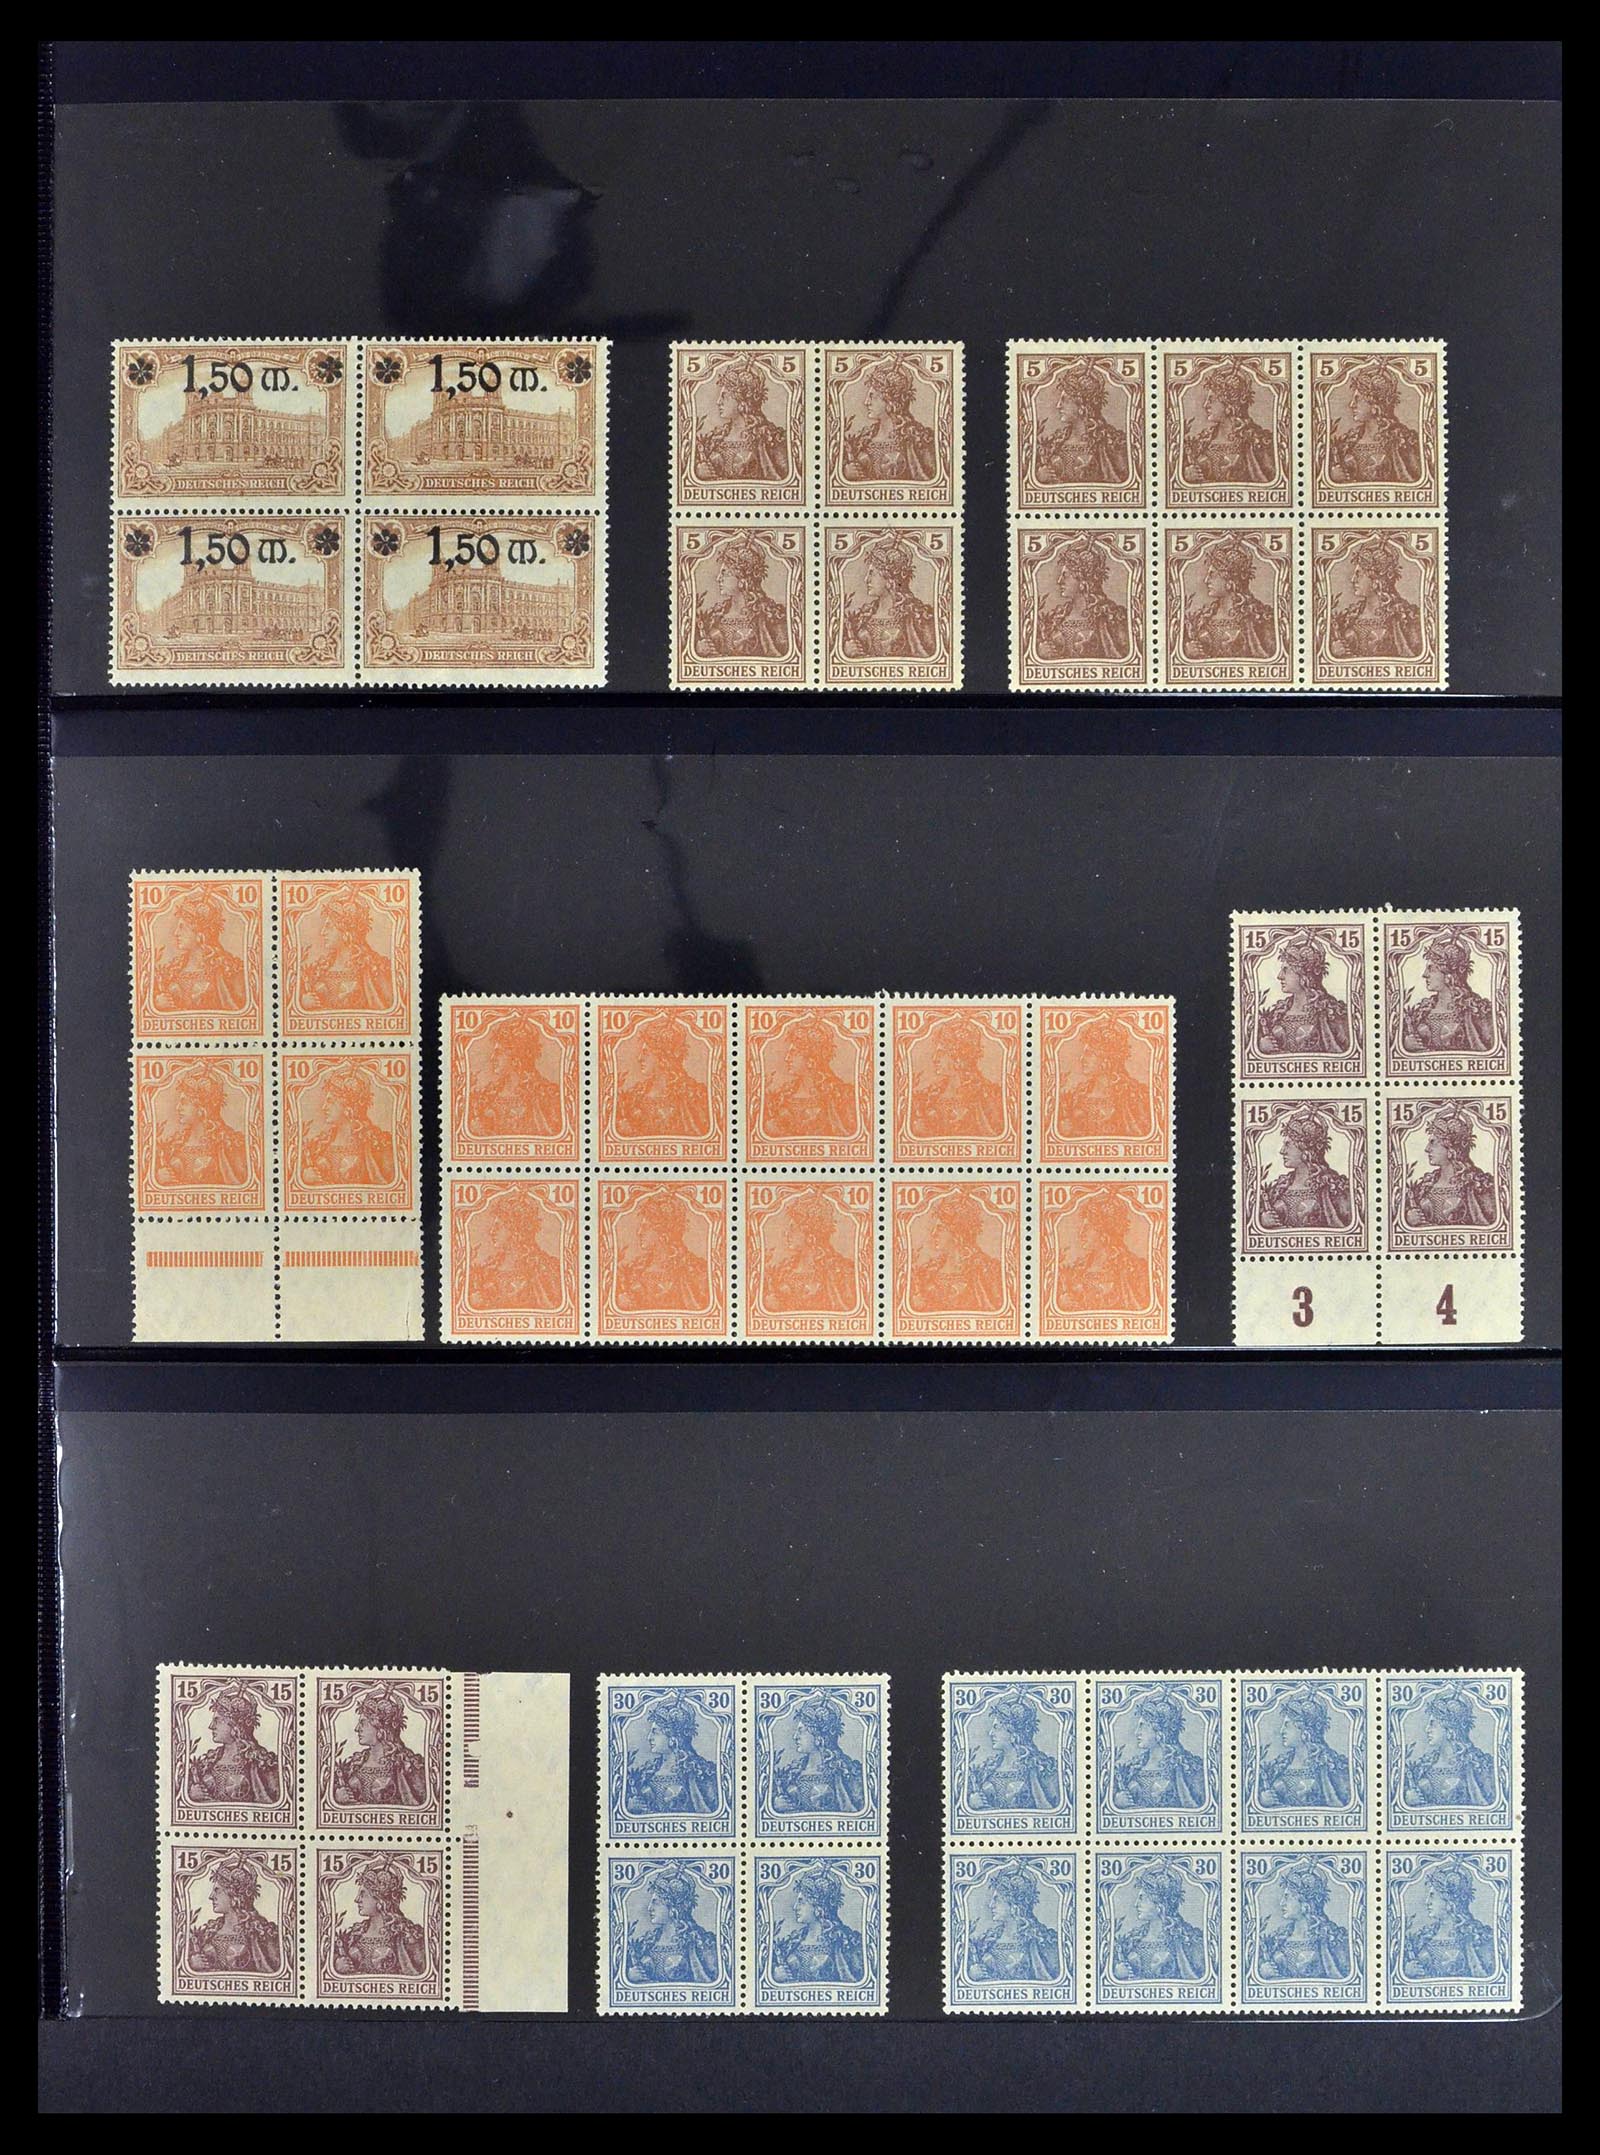 39255 0007 - Stamp collection 39255 German Reich MNH blocks of 4.